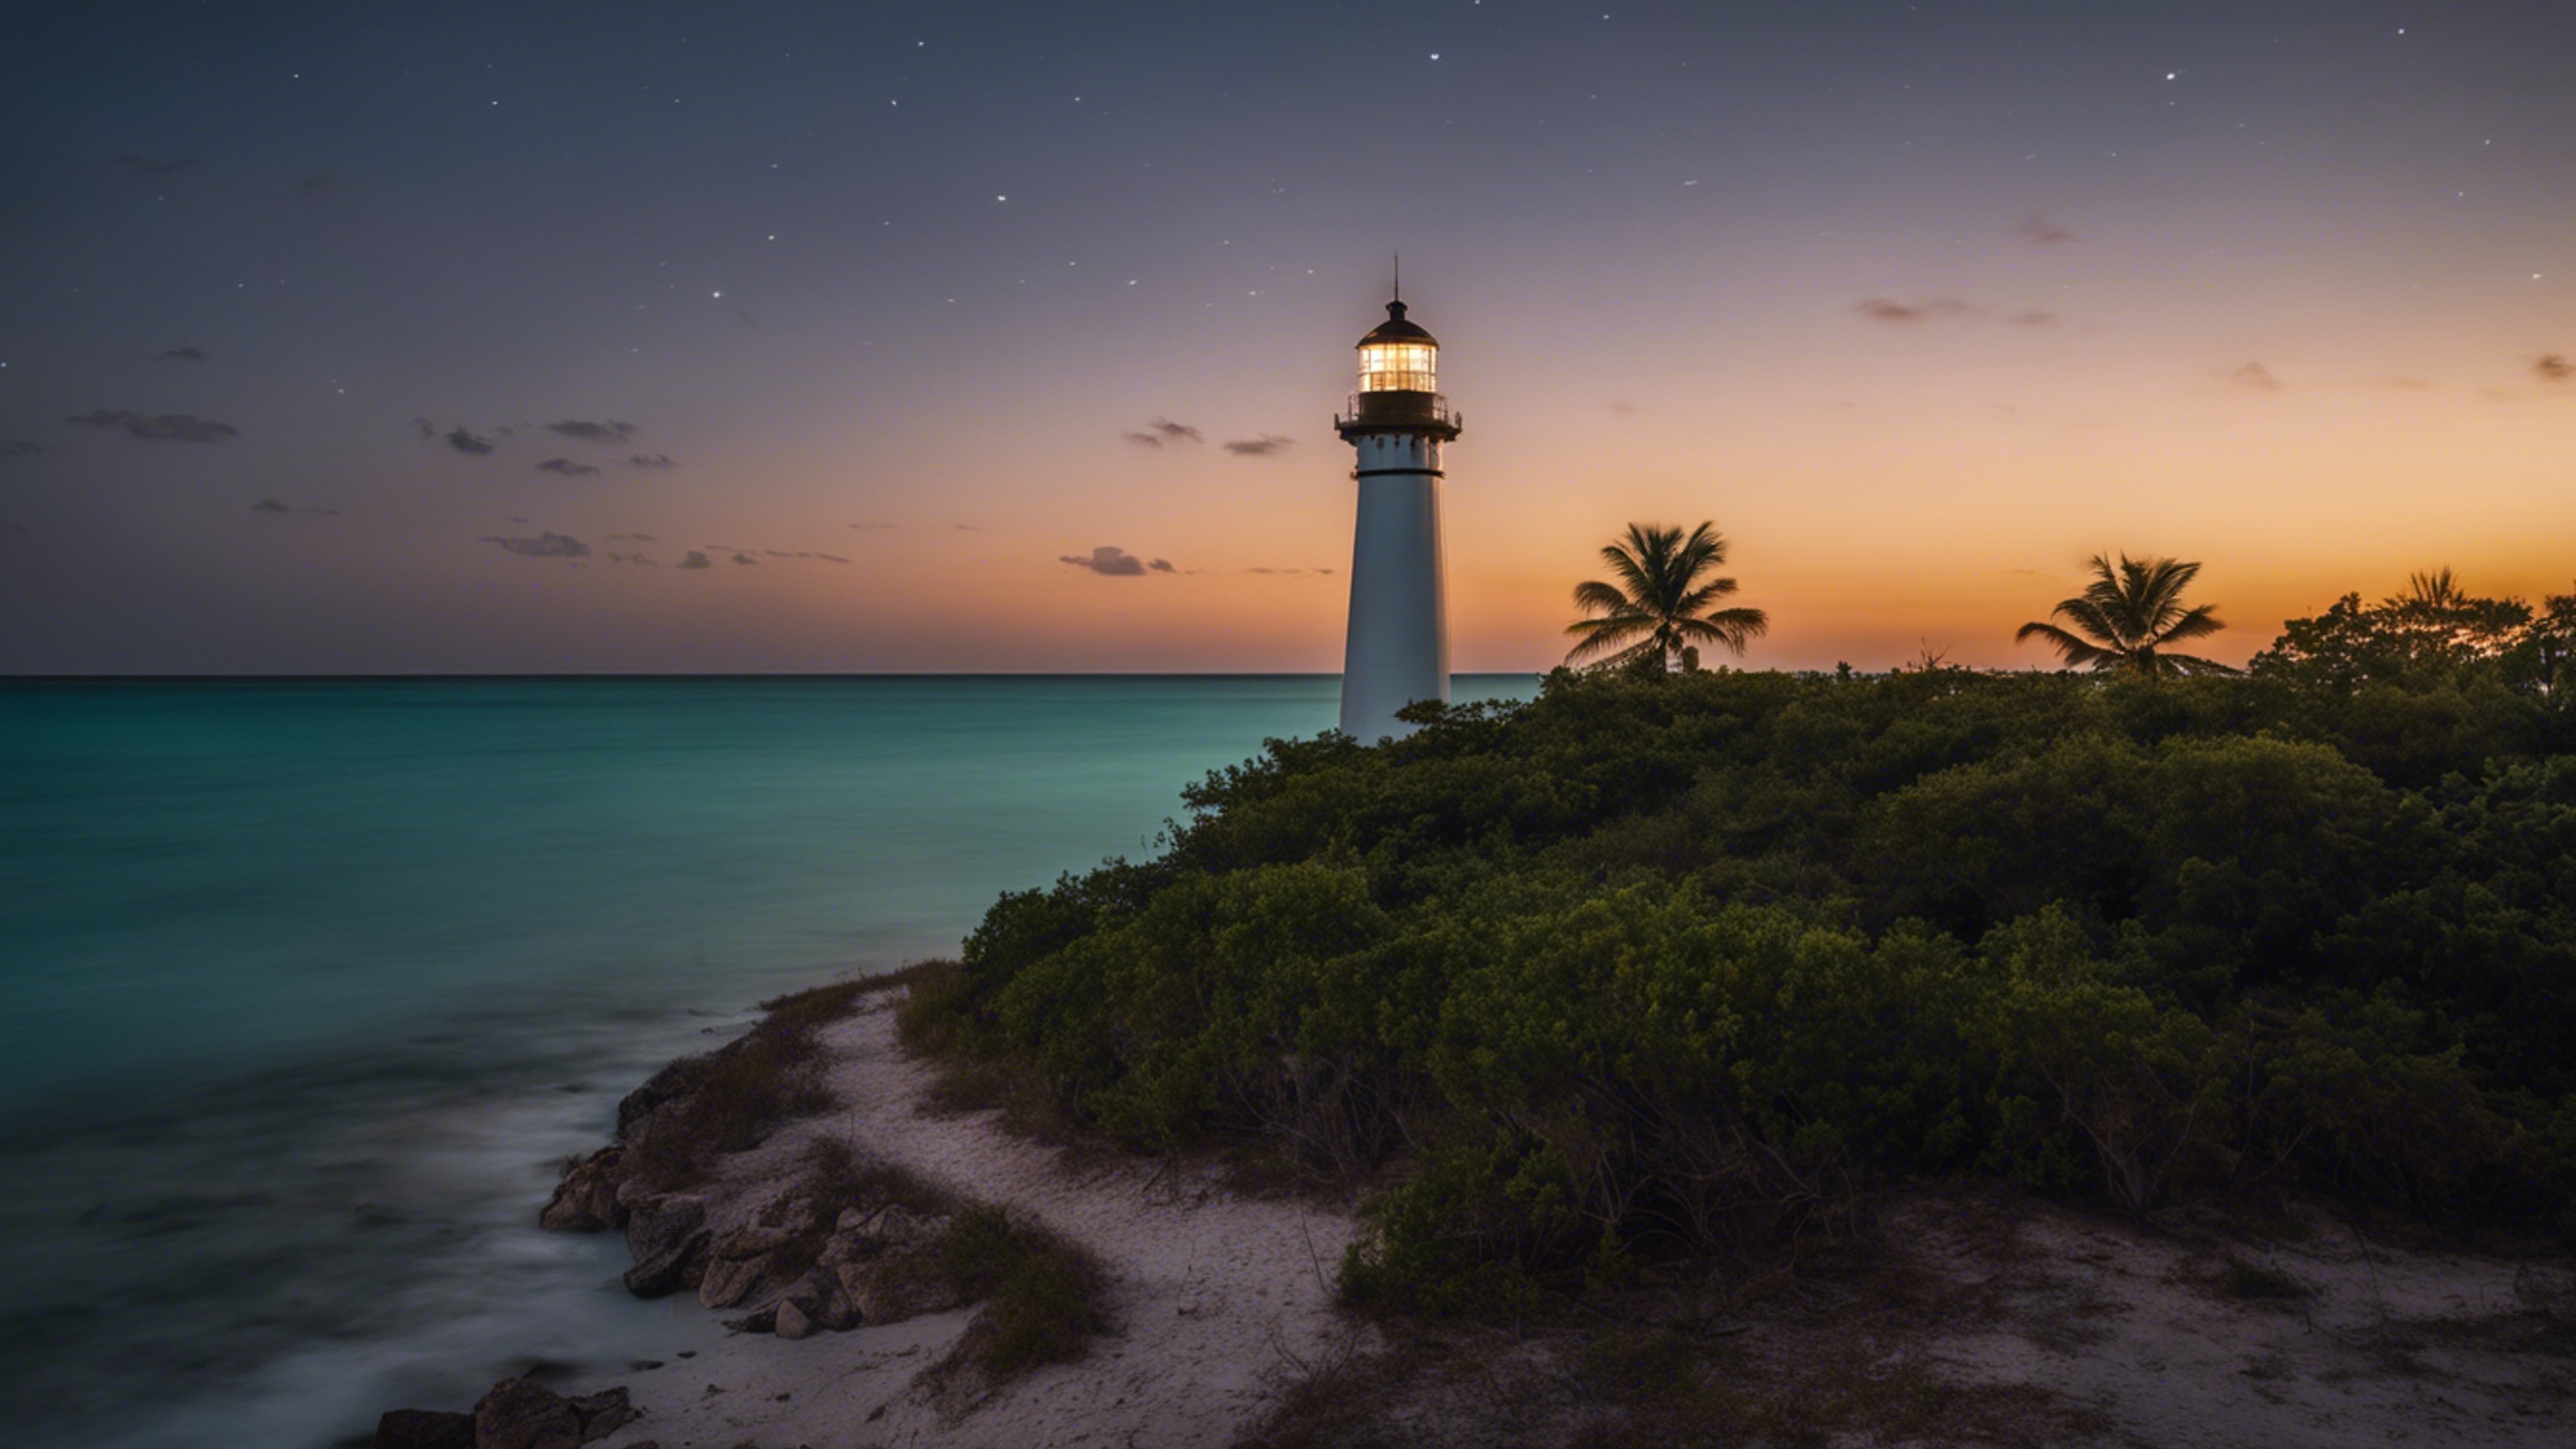 A night shot of an historic lighthouse in Key Biscayne, with the beam of light cutting through the darkness. Обои[4d5993bb763c4a90b239]